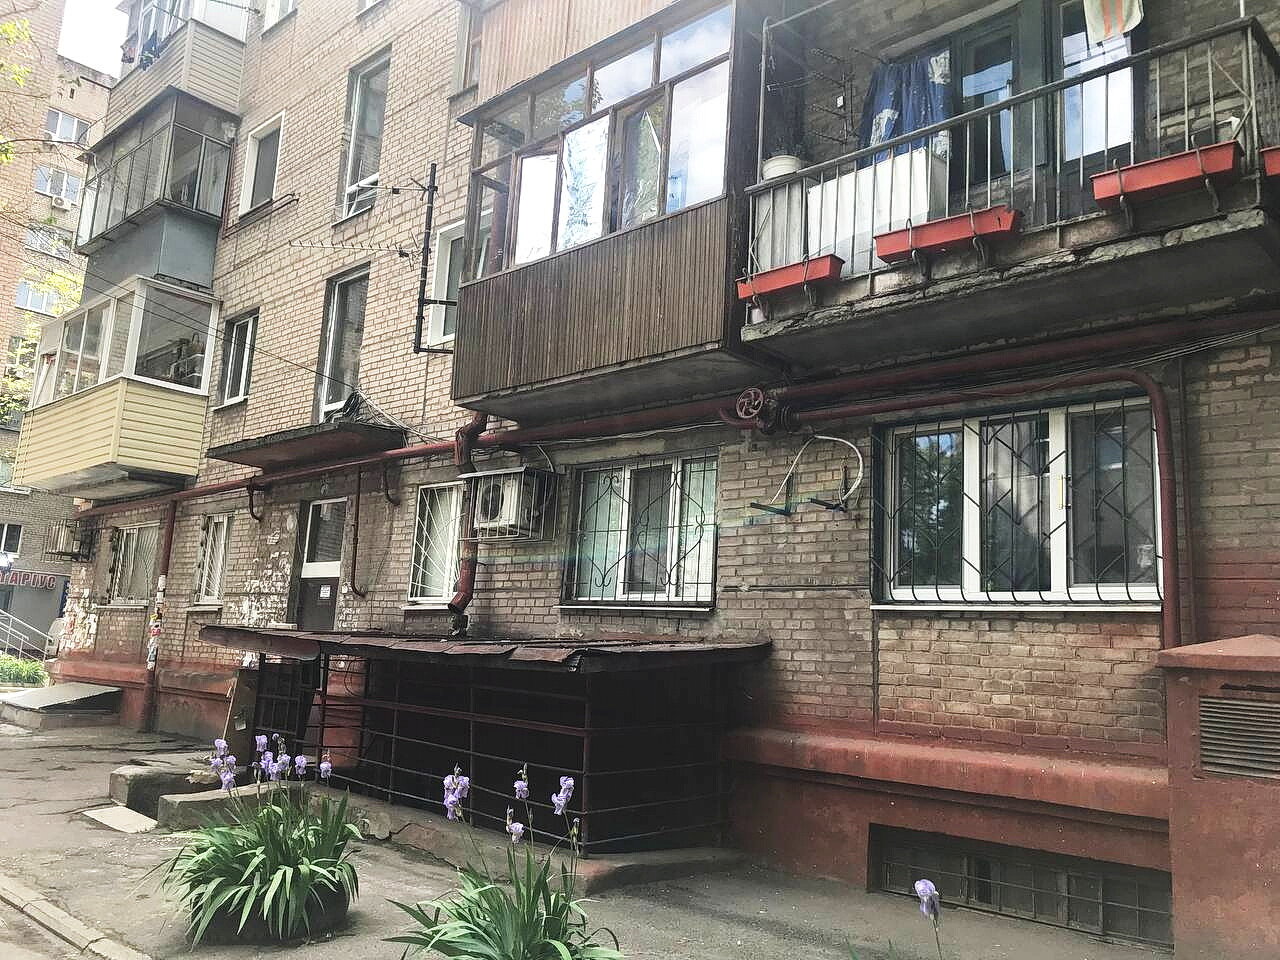 Both companies Sliusariev co-owns, Travel Retail Ukraine and Duty Free Odesa, are registered in an apartment house in central Dnipro. There is no sign plate on the building or the apartment door indicating that any firm operates there.